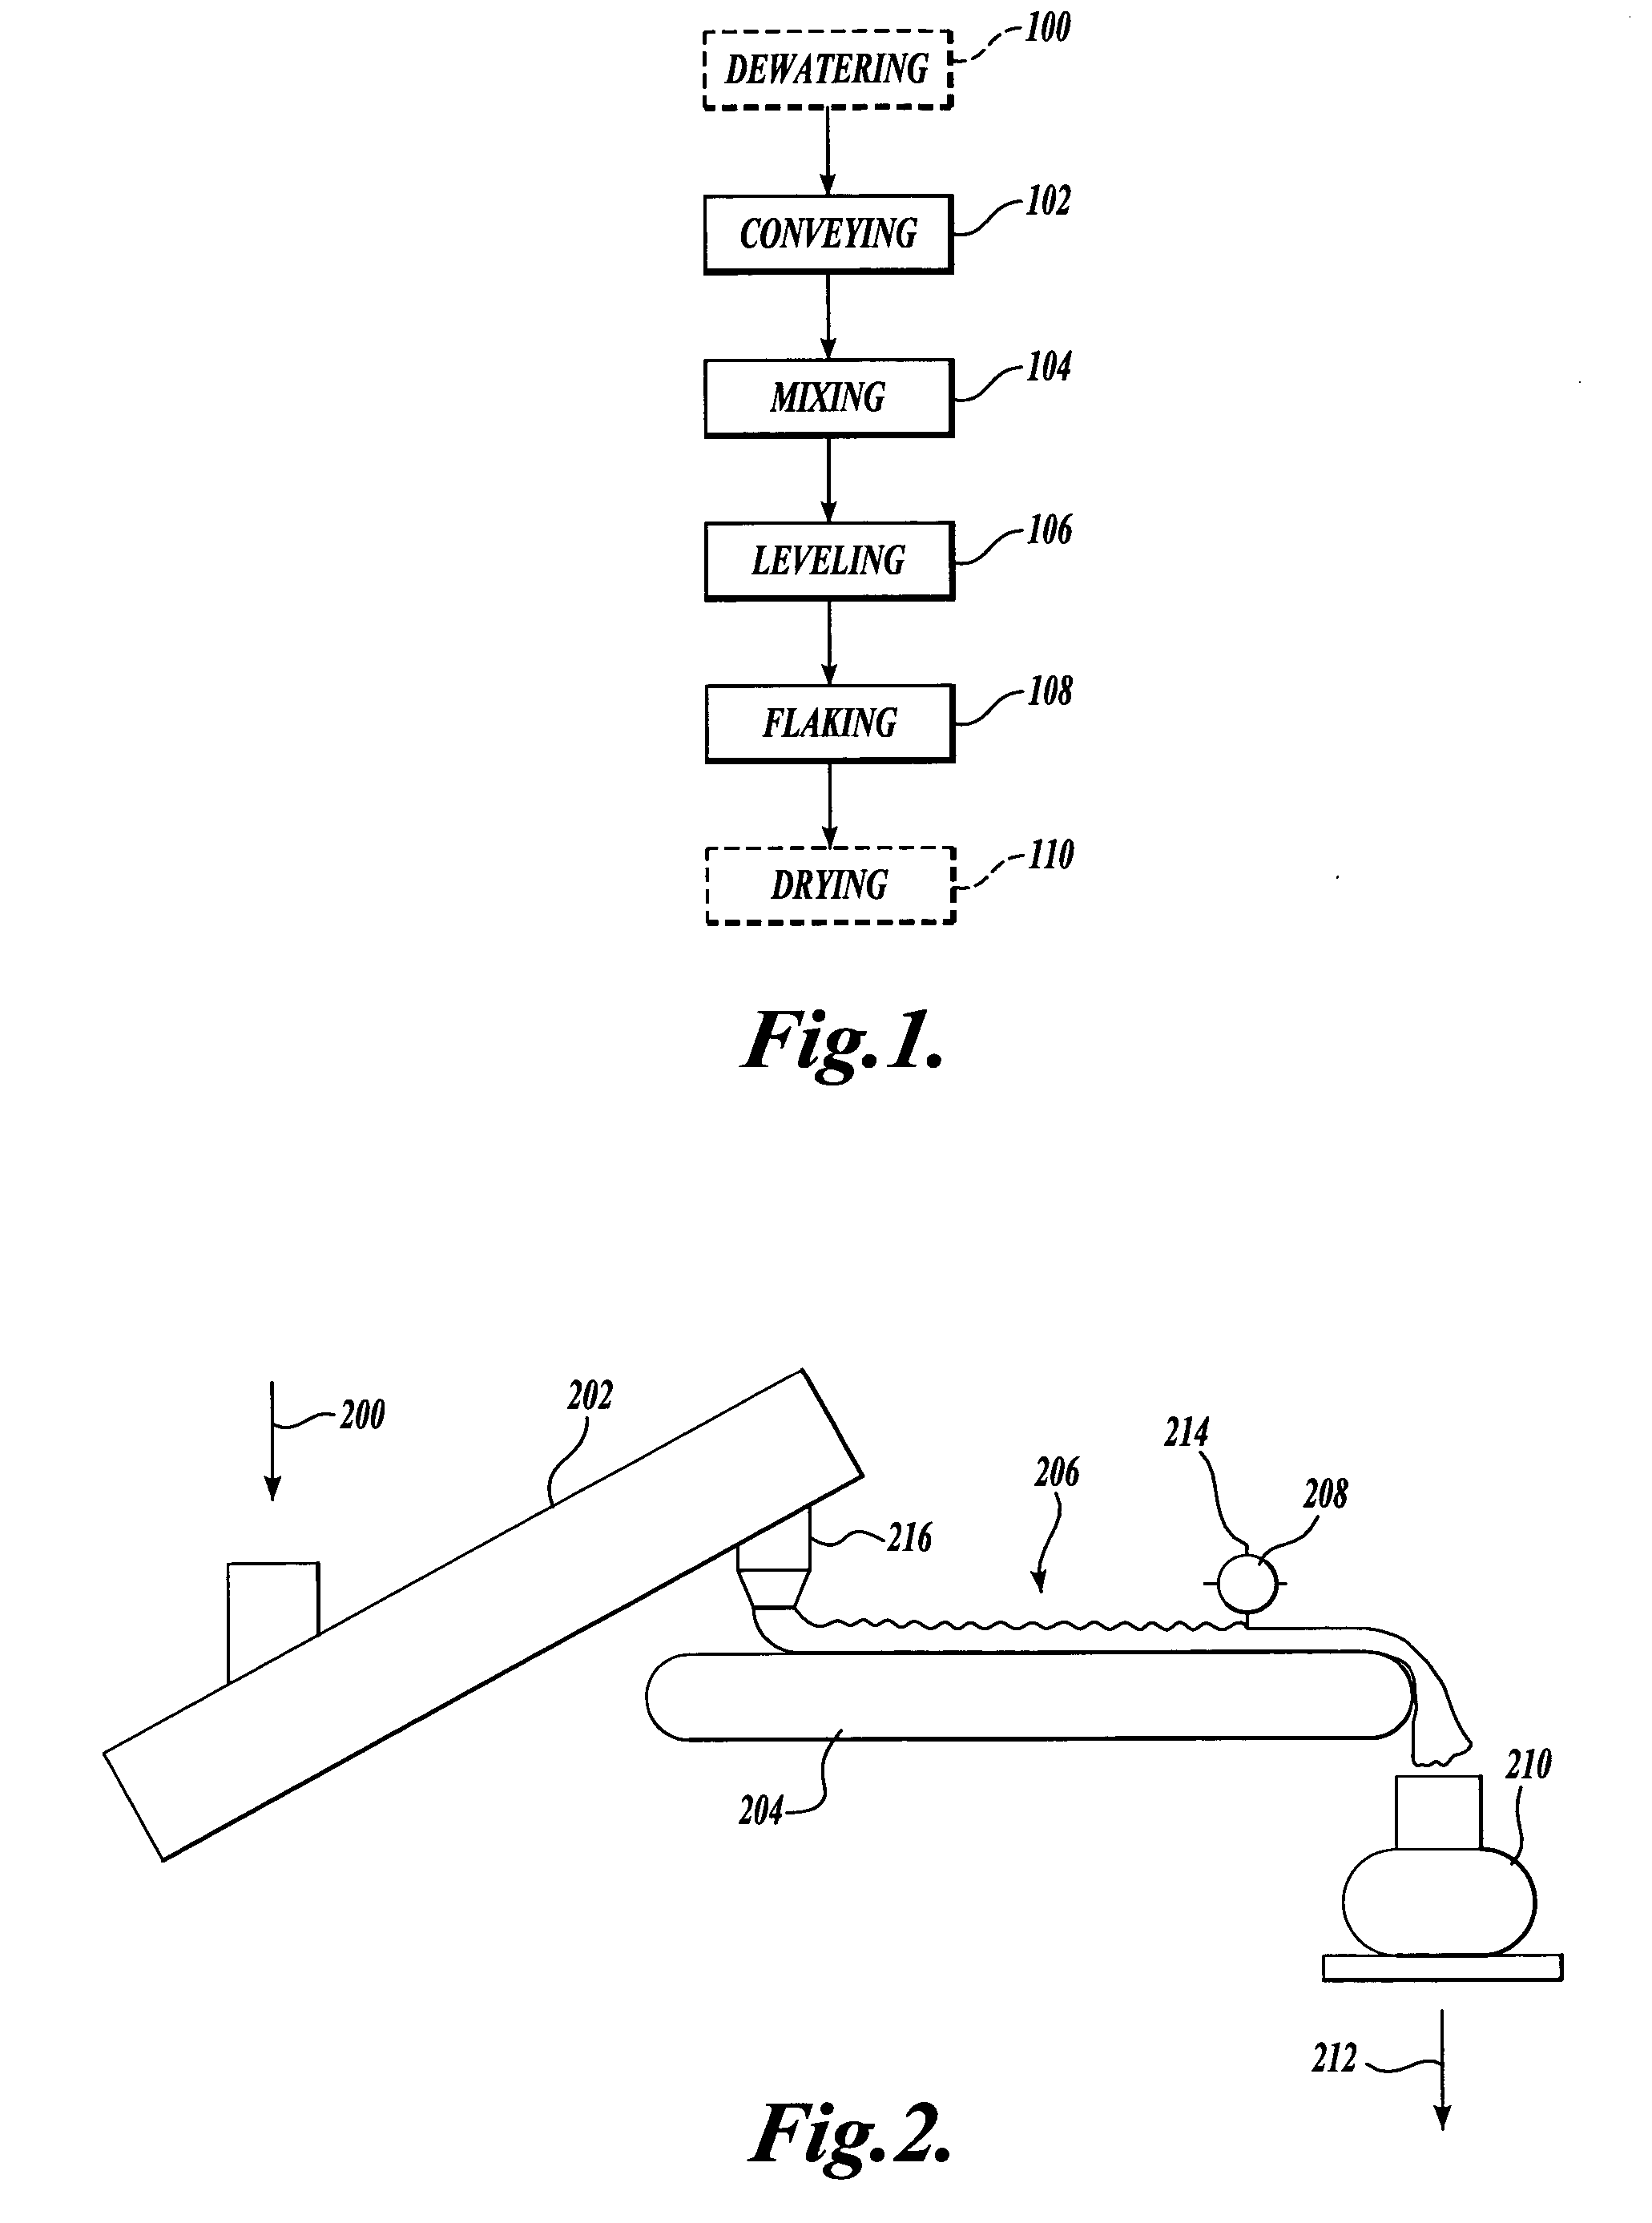 Method for conveying, mixing, and leveling dewatered pulp prior to drying